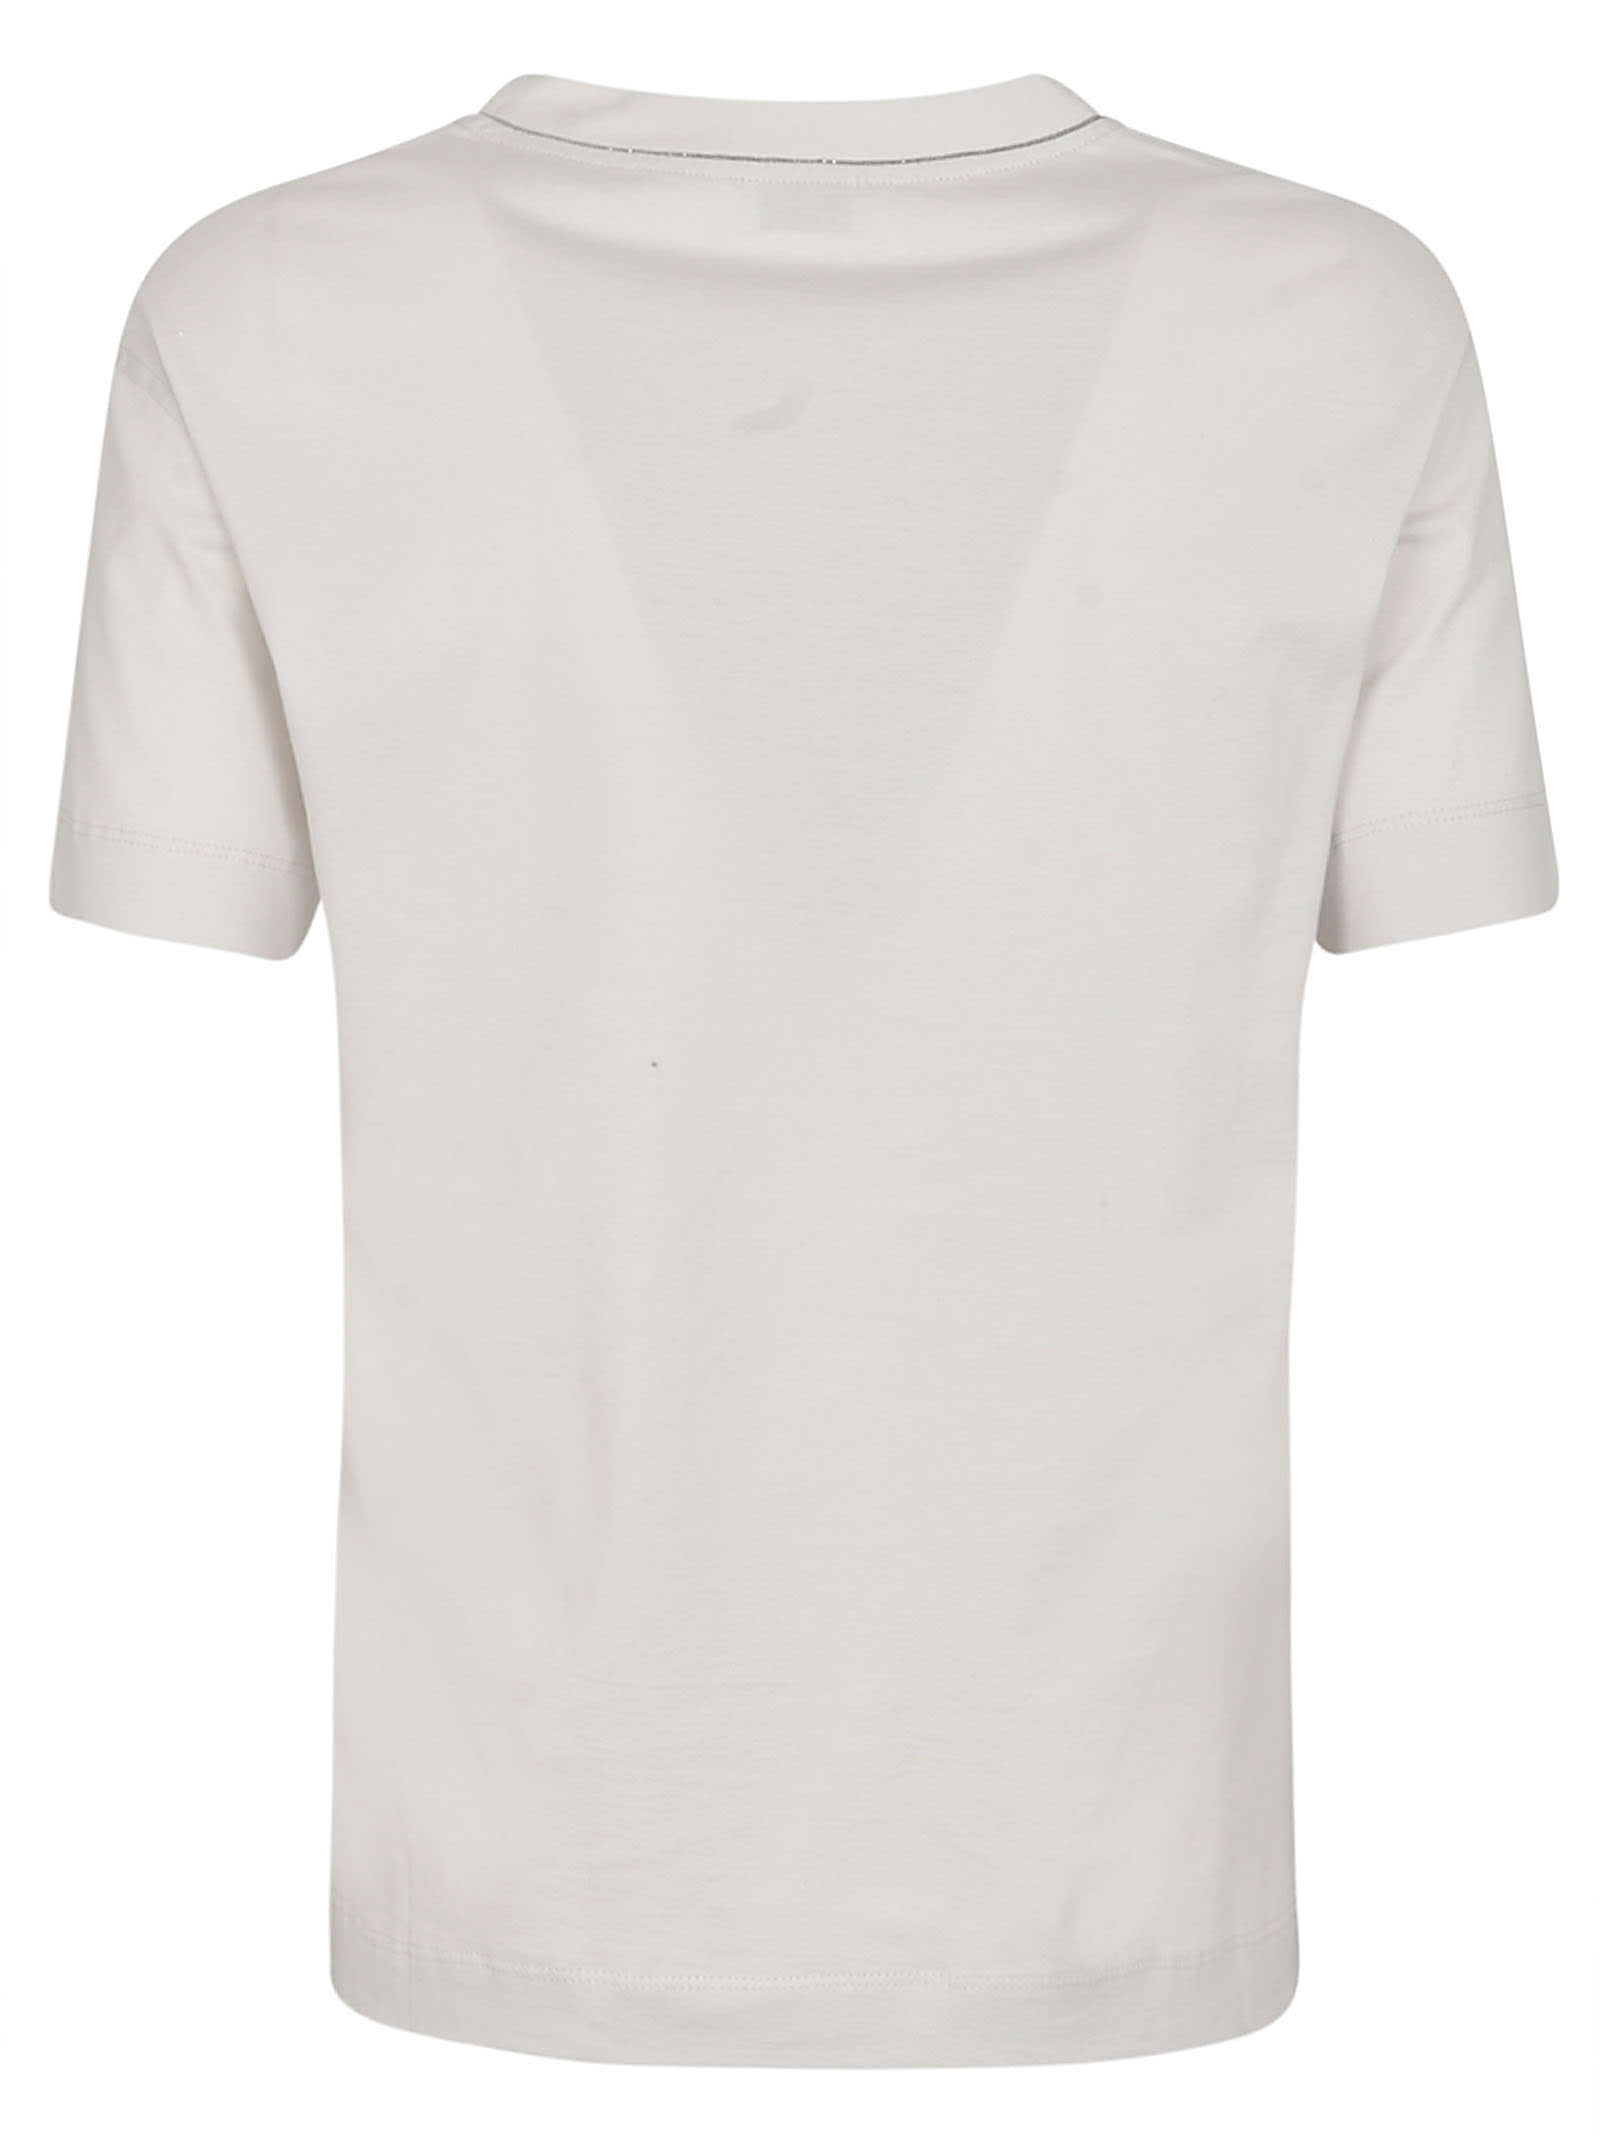 Shop Brunello Cucinelli Touched Nature Logo T-shirt In Warm White